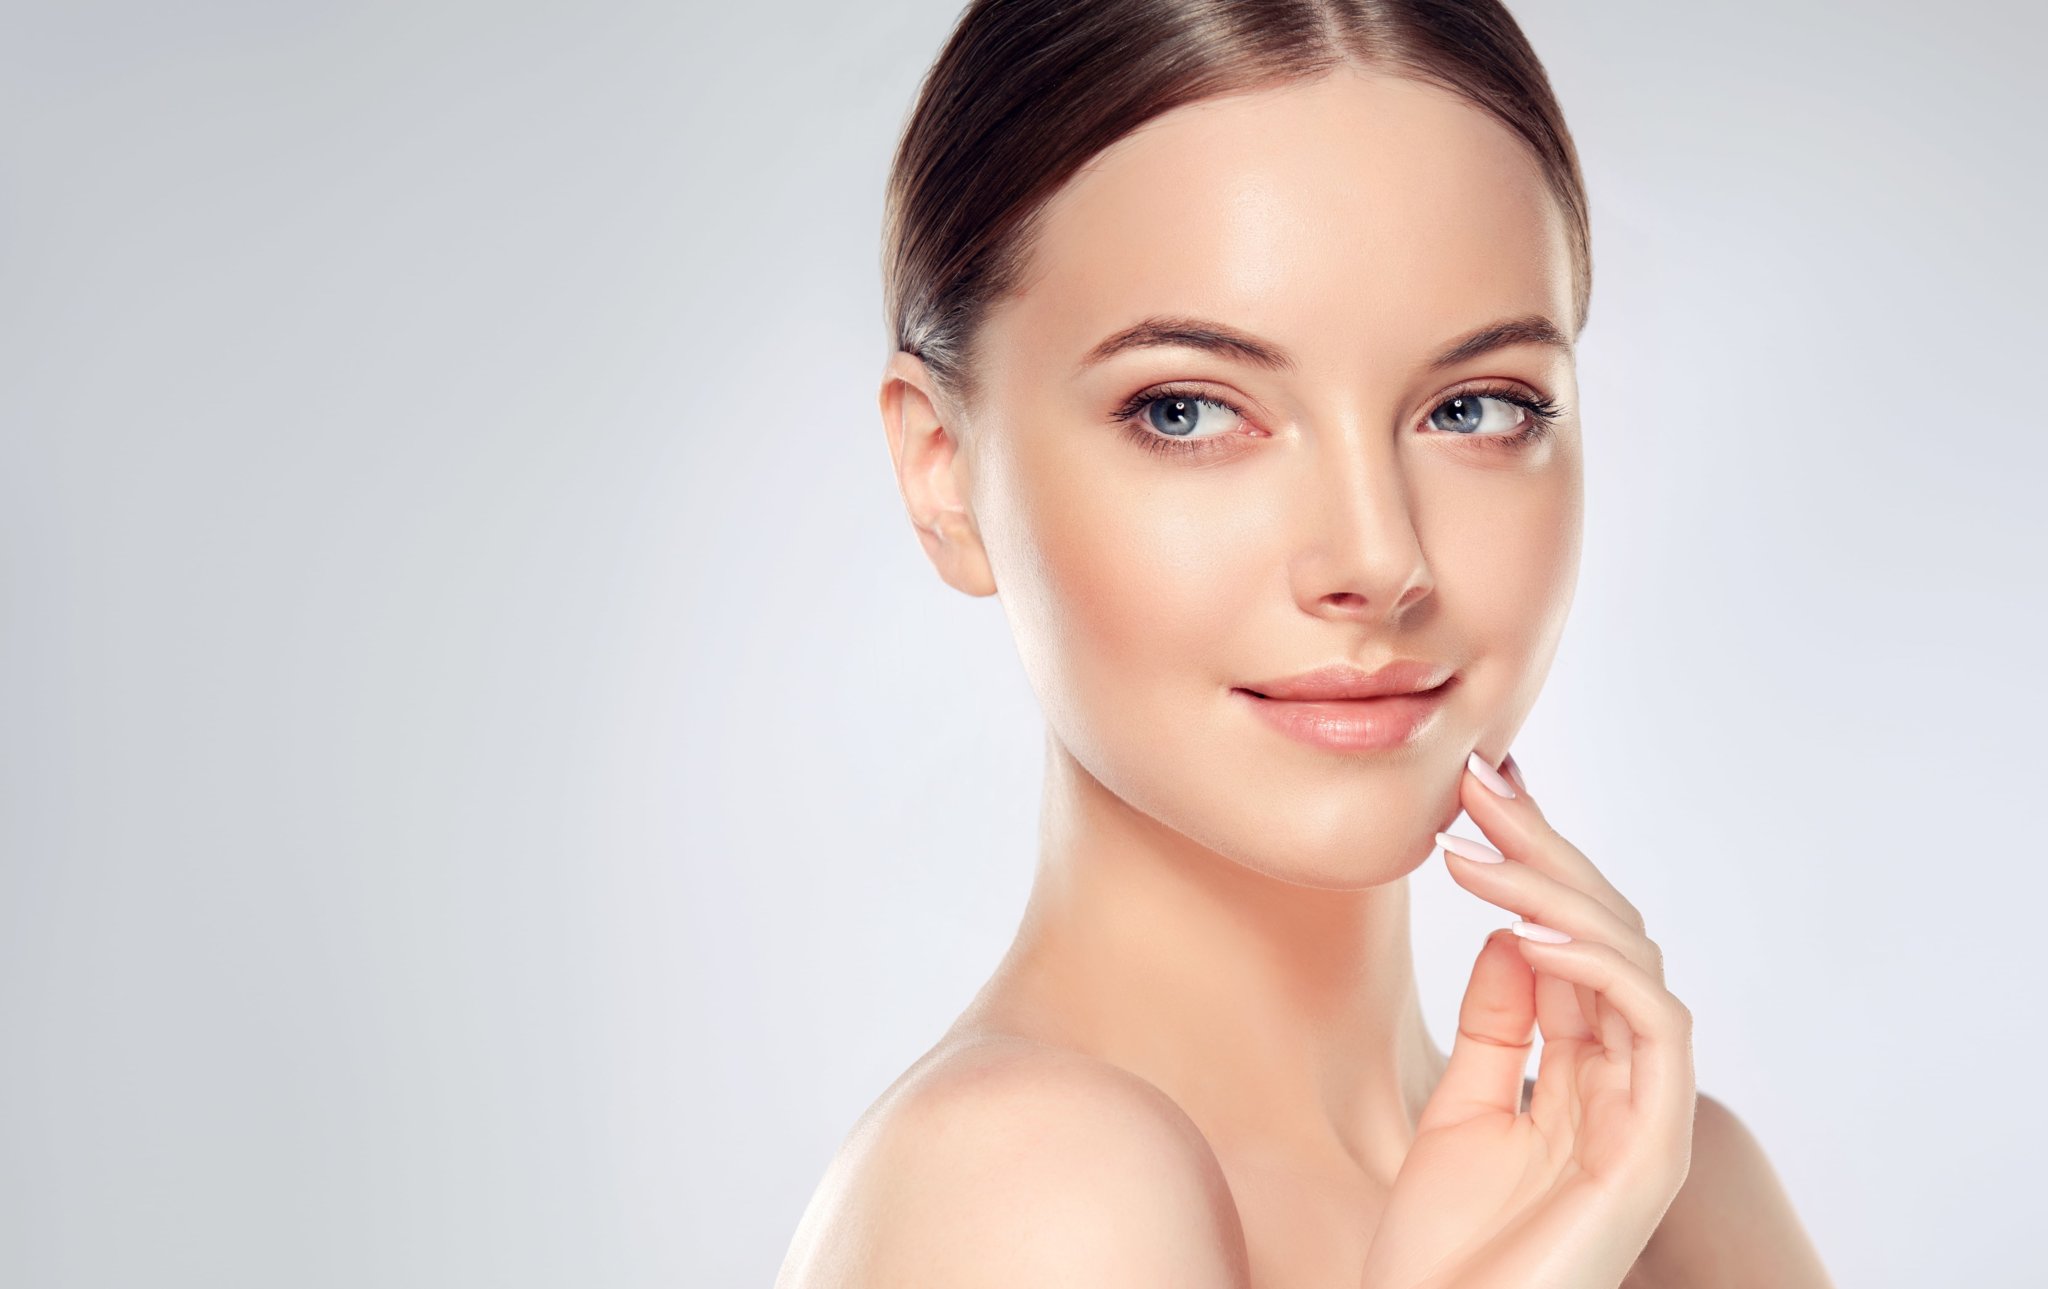 How Will My Skin Feel After RF Microneedling Treatment?